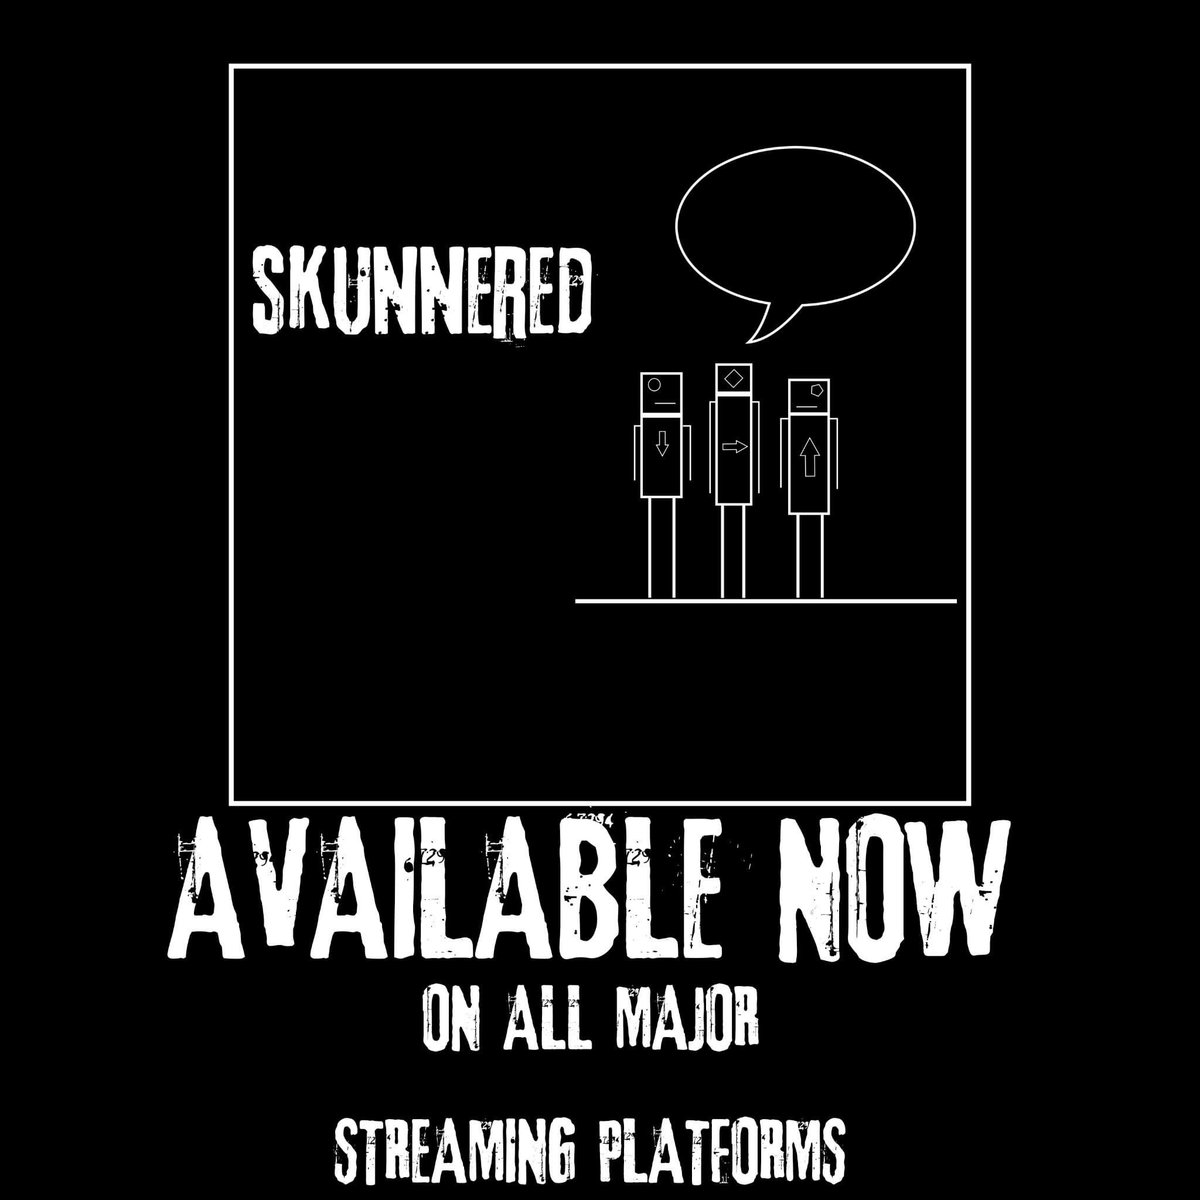 Our debut EP 'Skunnered' is available on all major streaming platforms now. We hope you enjoy <3 SPOTIFY - open.spotify.com/album/4lLRA5sN… APPLE MUSIC - music.apple.com/gb/album/skunn… #NewMusic #scottish #punk #punkrock #OUTNOW #music #release